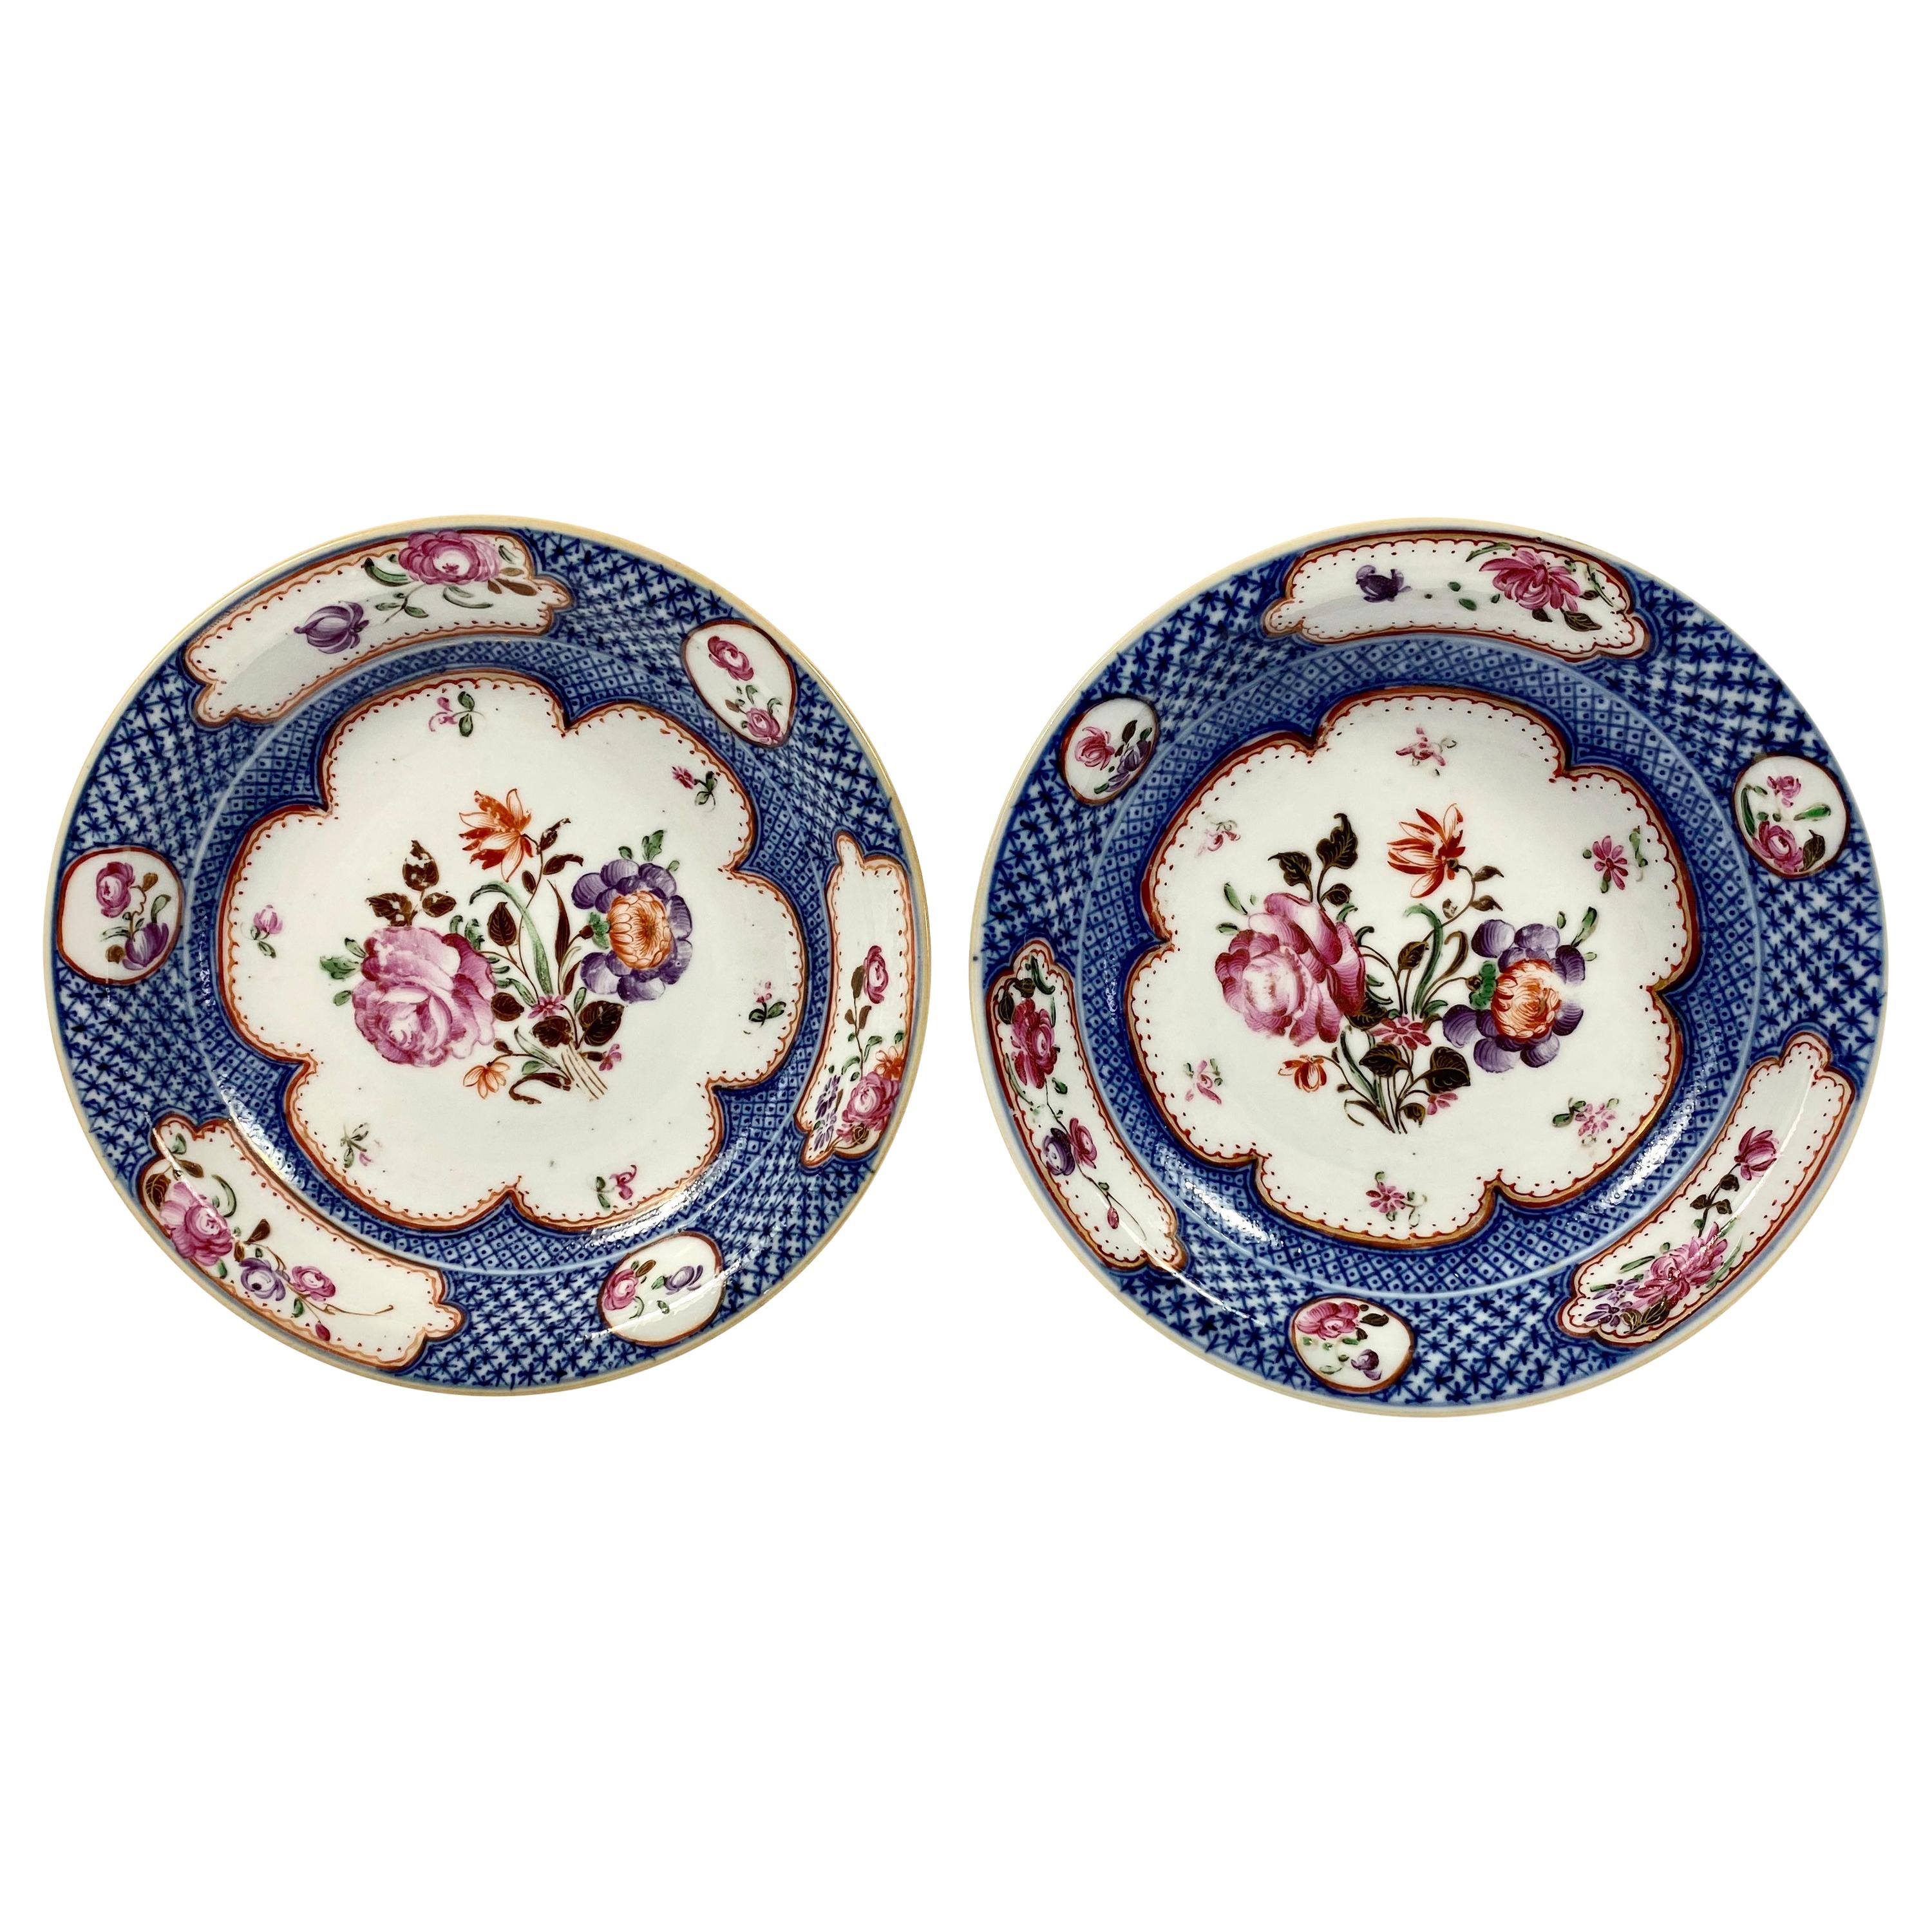 Pair of Chinese Porcelain Dishes, Compagnie des Indes circa 1760 Qianlong Period